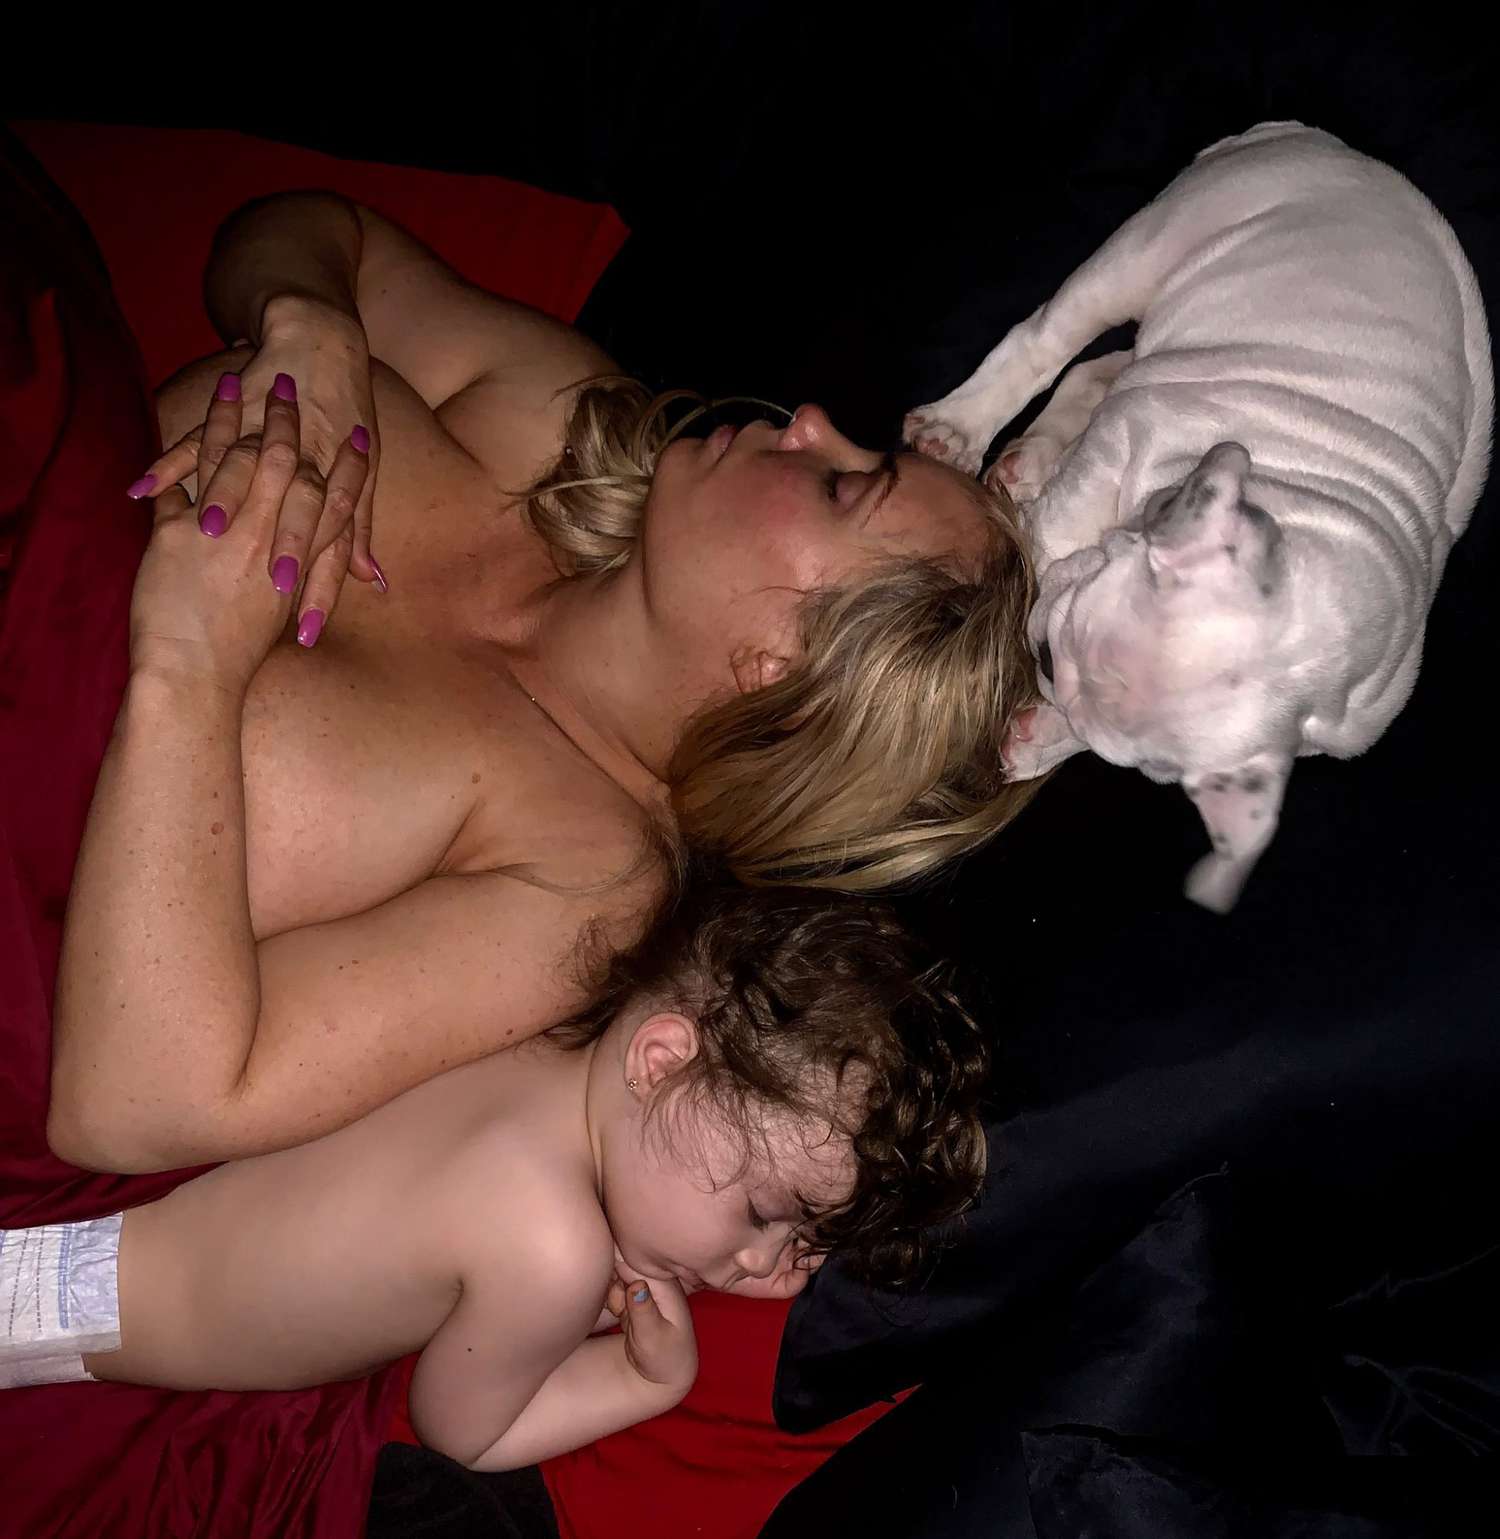 carol shiflett recommends coco austin leaked nudes pic